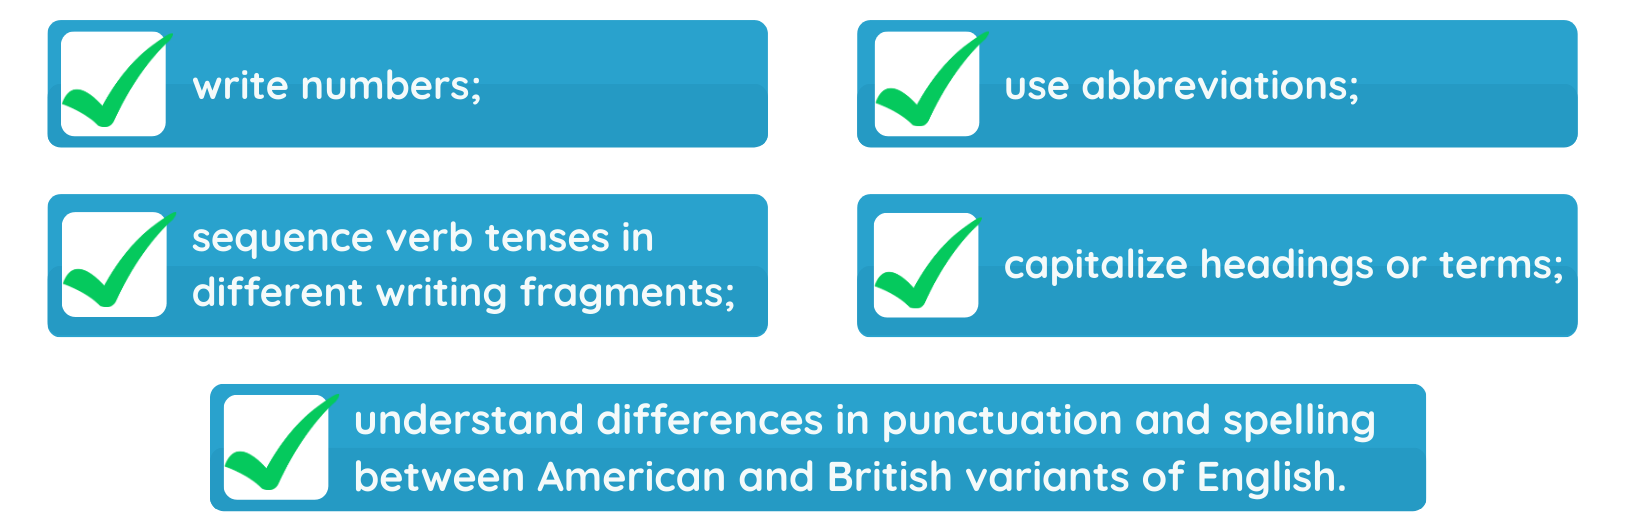 Stylistic conventions that should be correctly applied in academic writing